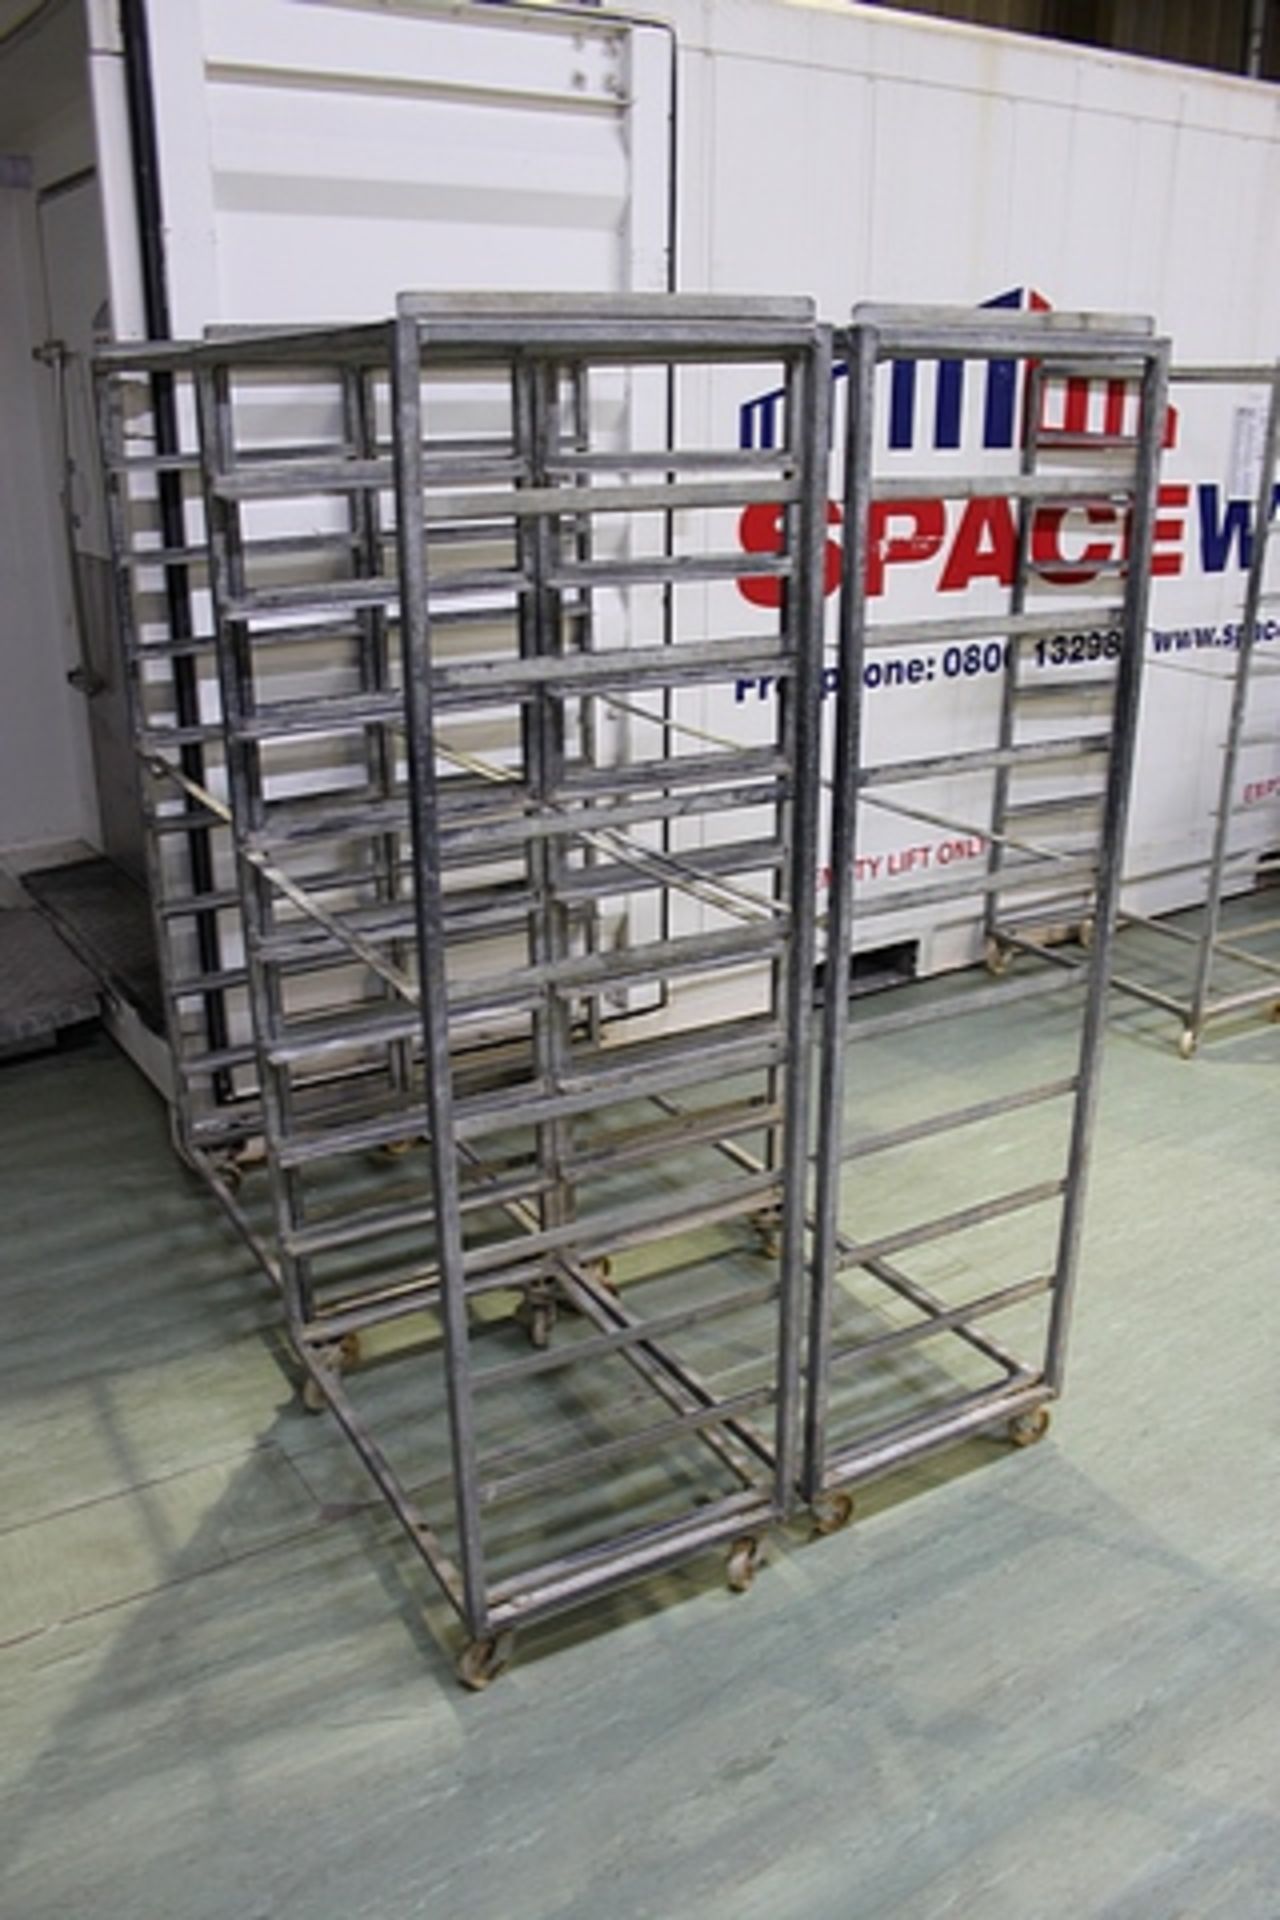 5 x stainless steel 10 tier bakery rack 460mm x 830mm x 1980mm